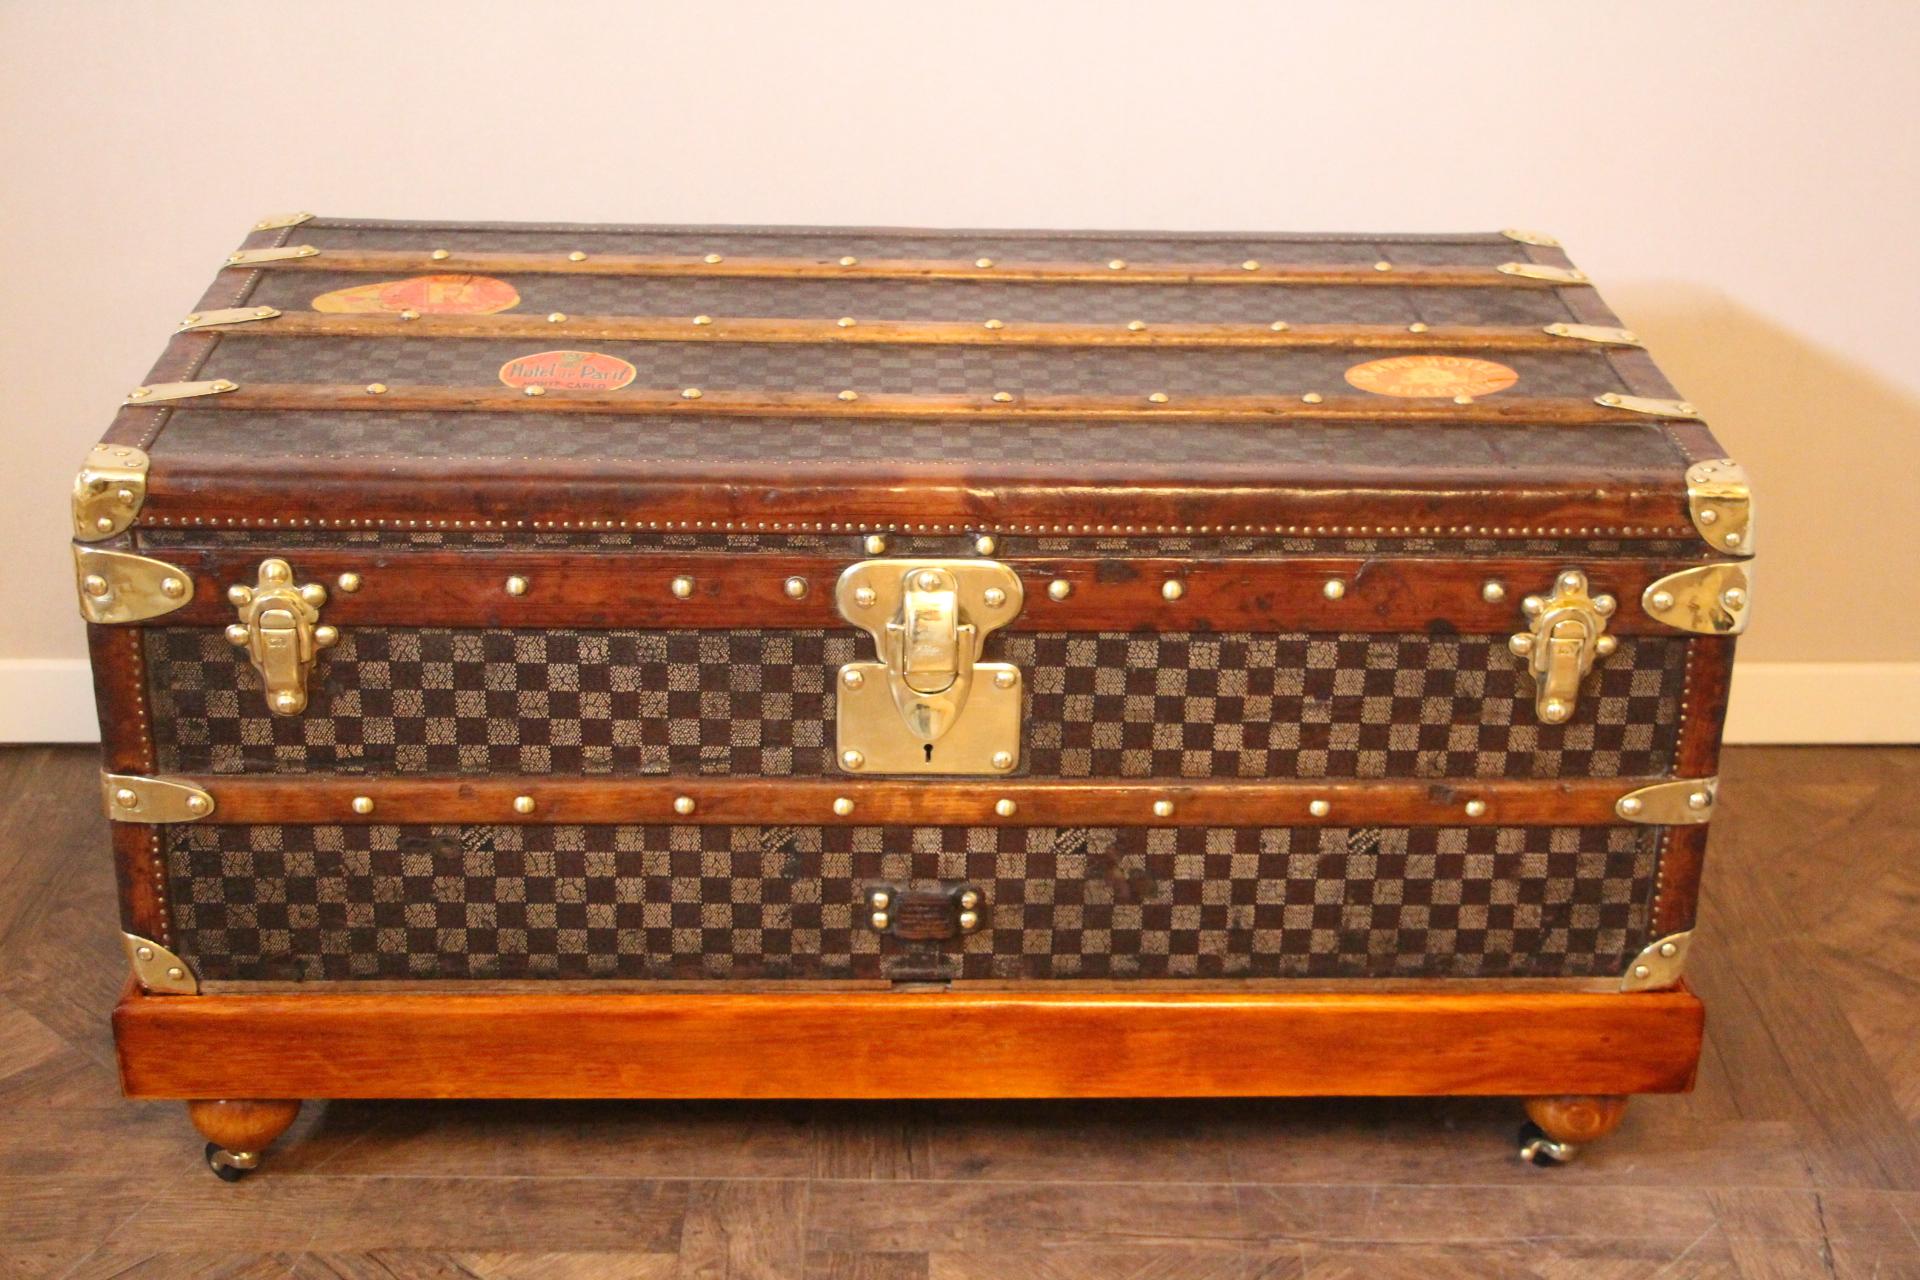 This beautiful Louis Vuitton trunk features the very rare and sought after checkered pattern canvas. This canvas that also called damiers canvas is typical from the end of the 19th century. Moreover, this trunk is a high end one as far as it